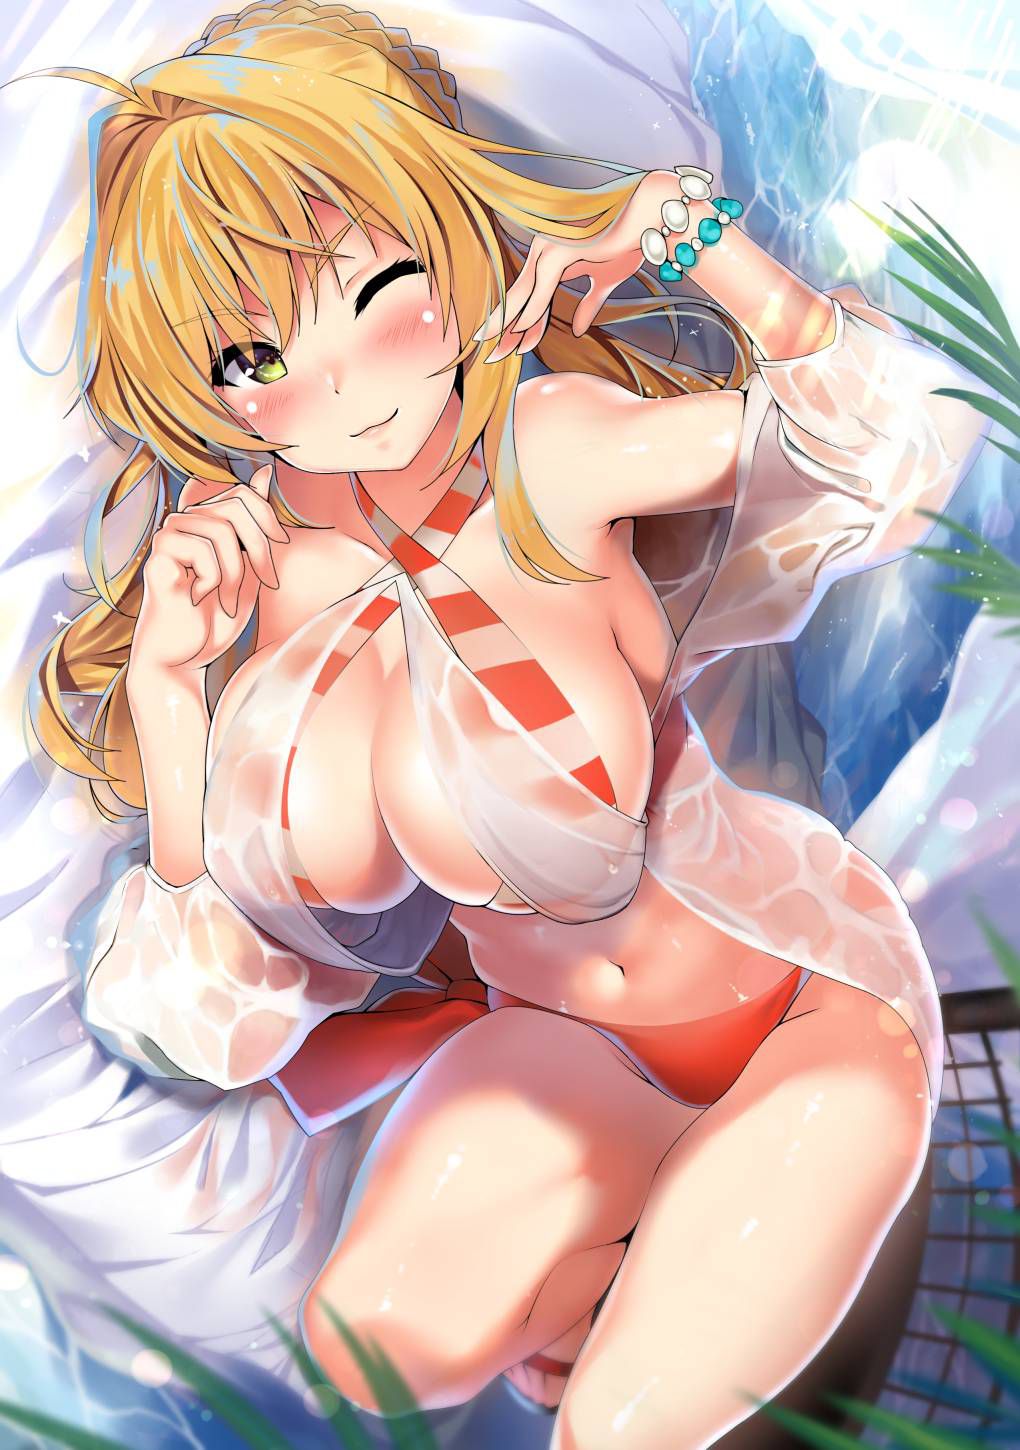 【Secondary】 Fate/Grand Order (Fate/EXTRA-CCC), Nero Claudius' love images summary! No.20 [20 sheets] 16